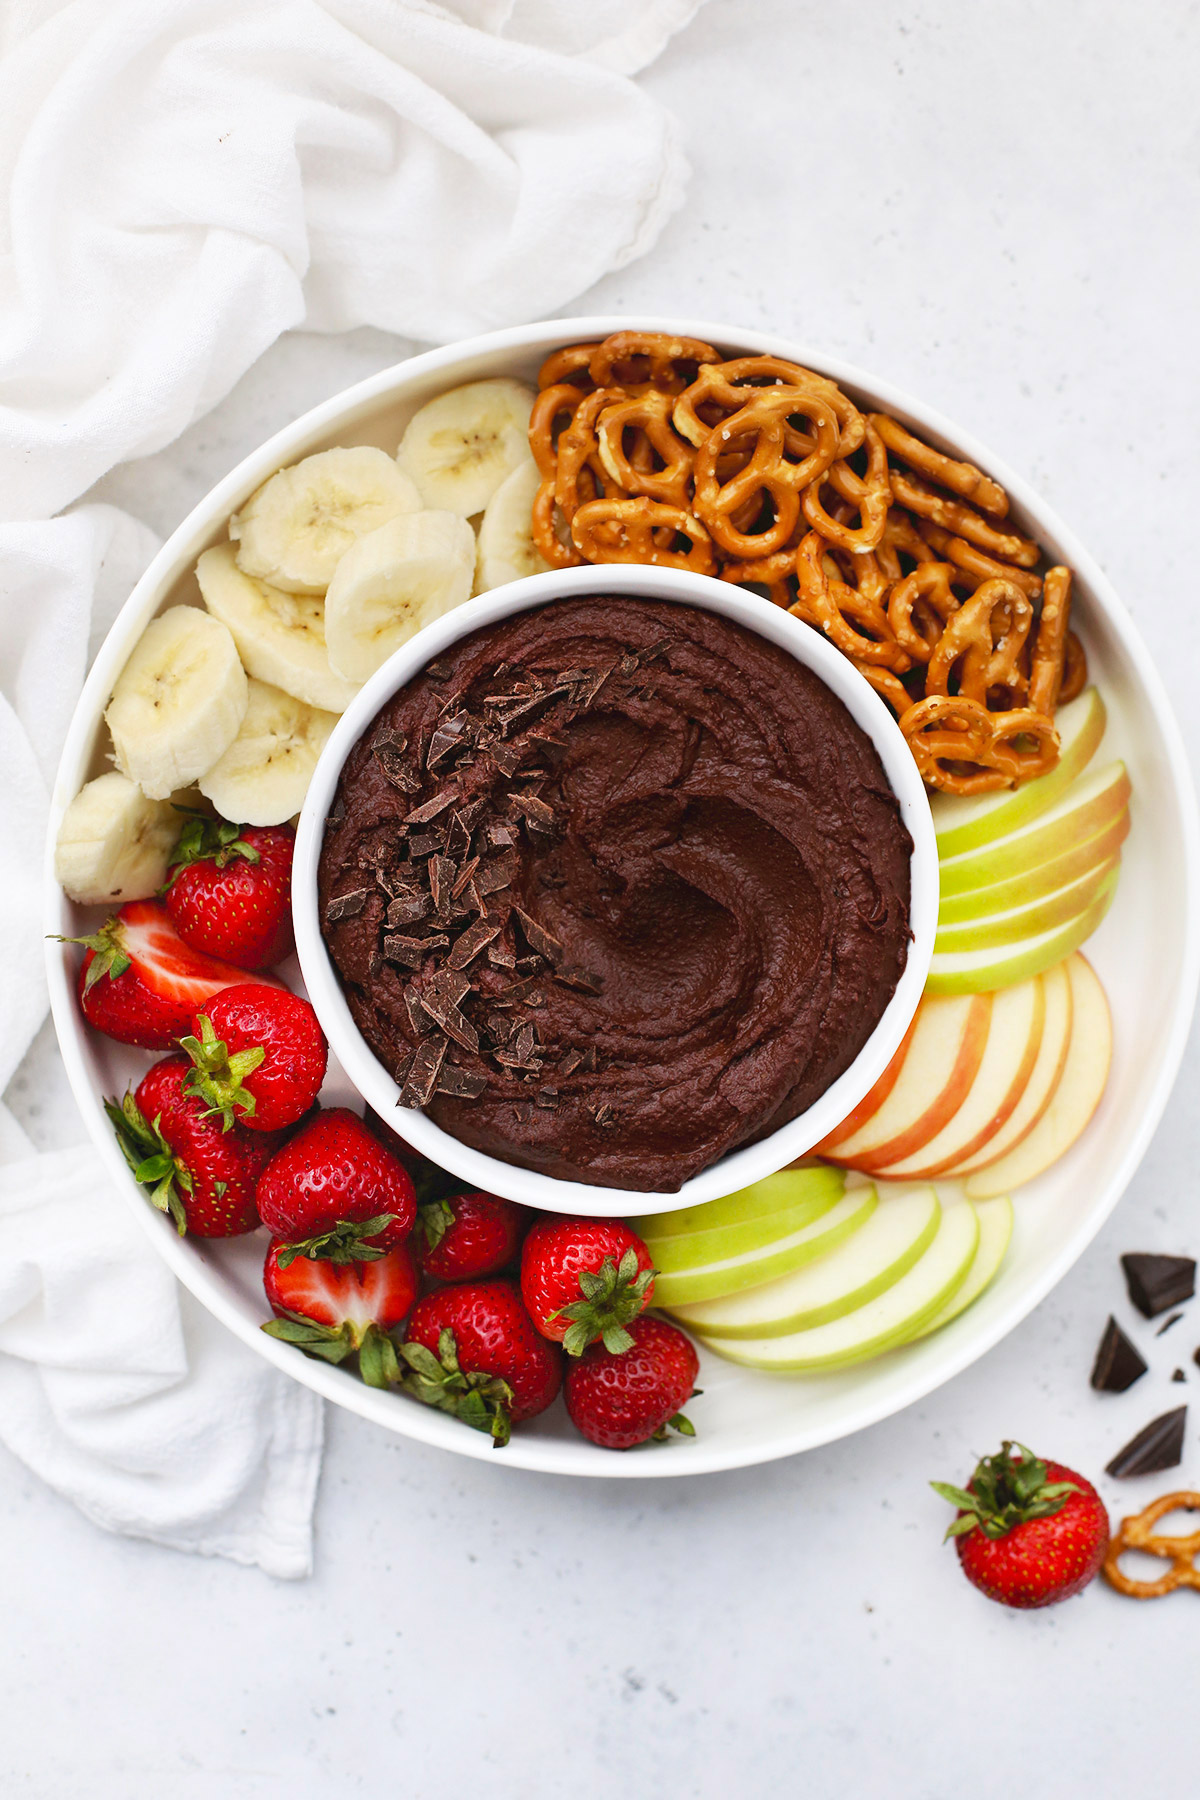 Overhead view of a bowl of chocolate brownie hummus on a fruit plate